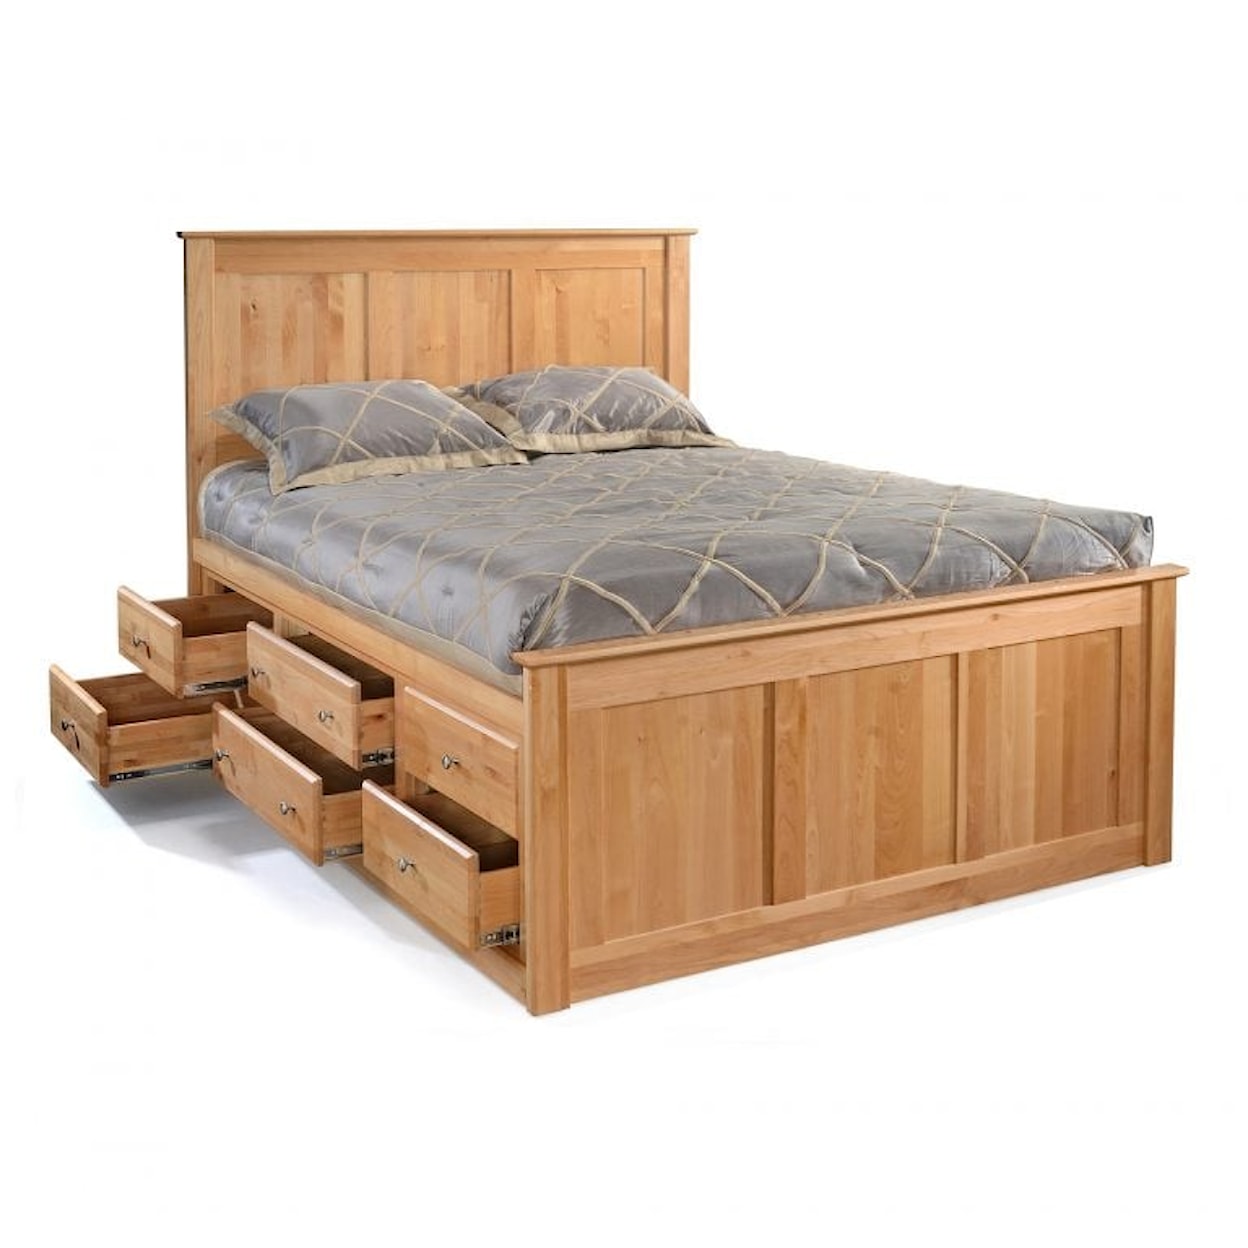 Archbold Furniture Chest Bed Twin 9-Drawer Chest Bed